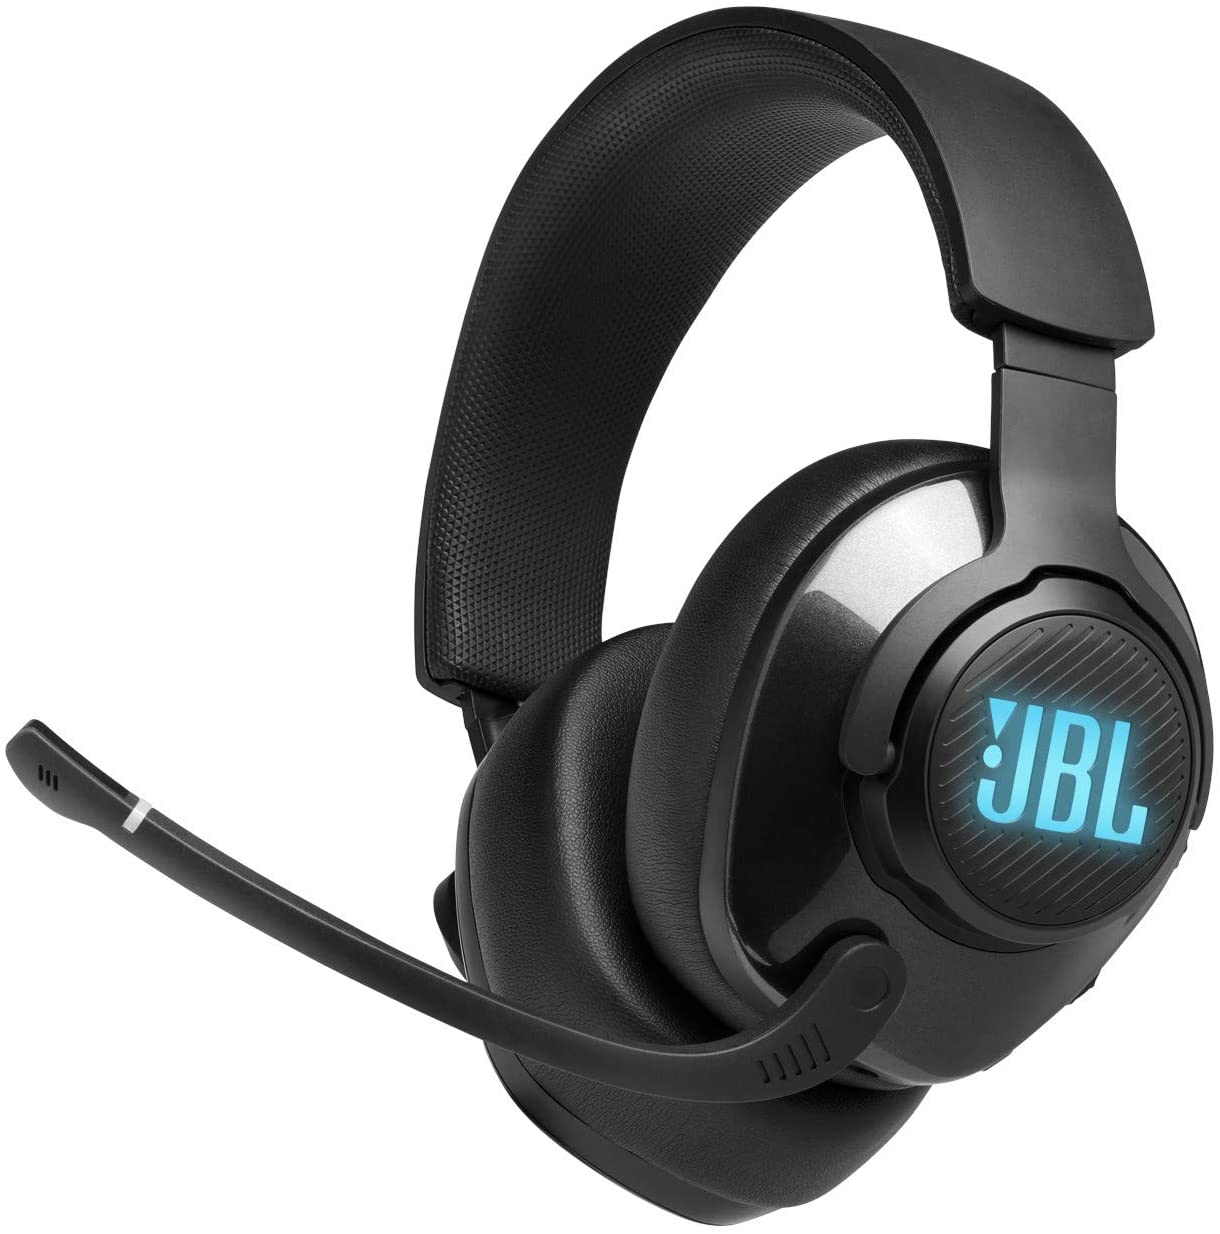 JBL USB WIRED OVER-EAR GAMING HEADSET WITH LED - Wizz Computers Ltd